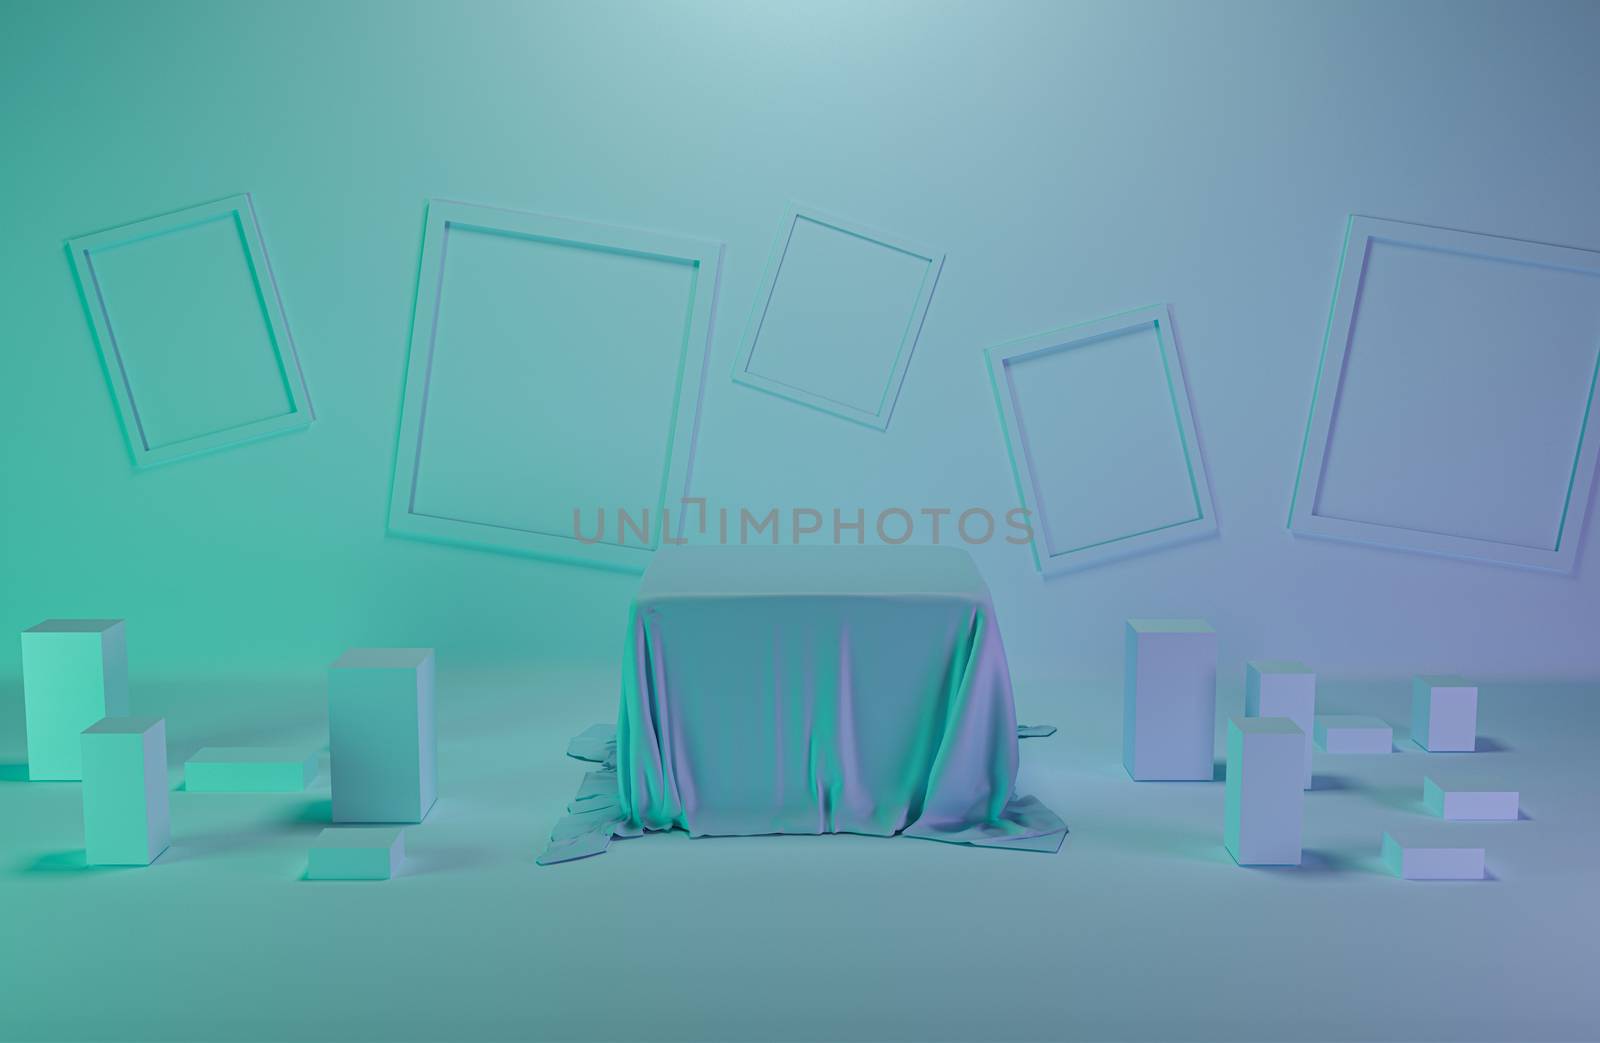 3d render, abstract geometric background, minimalistic primitive shapes, modern mock up, empty showcase, shop display ,blank template